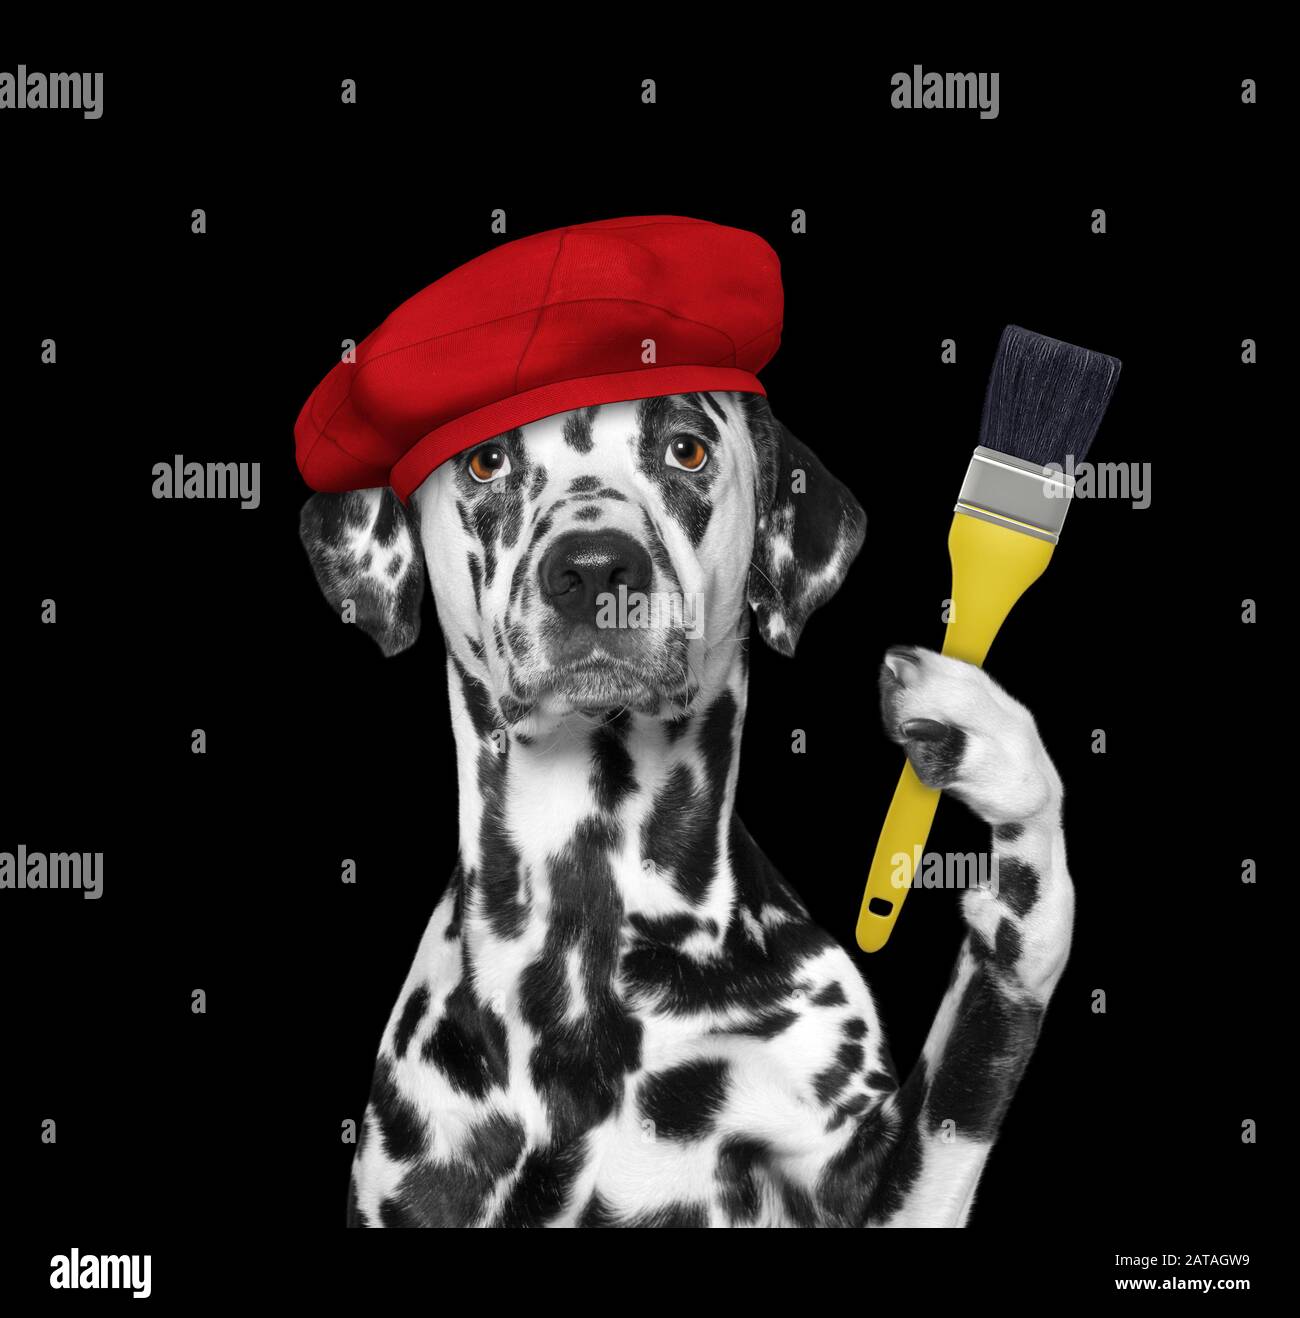 Dalmatian dog as a painter with a brush. Isolated on black Stock Photo